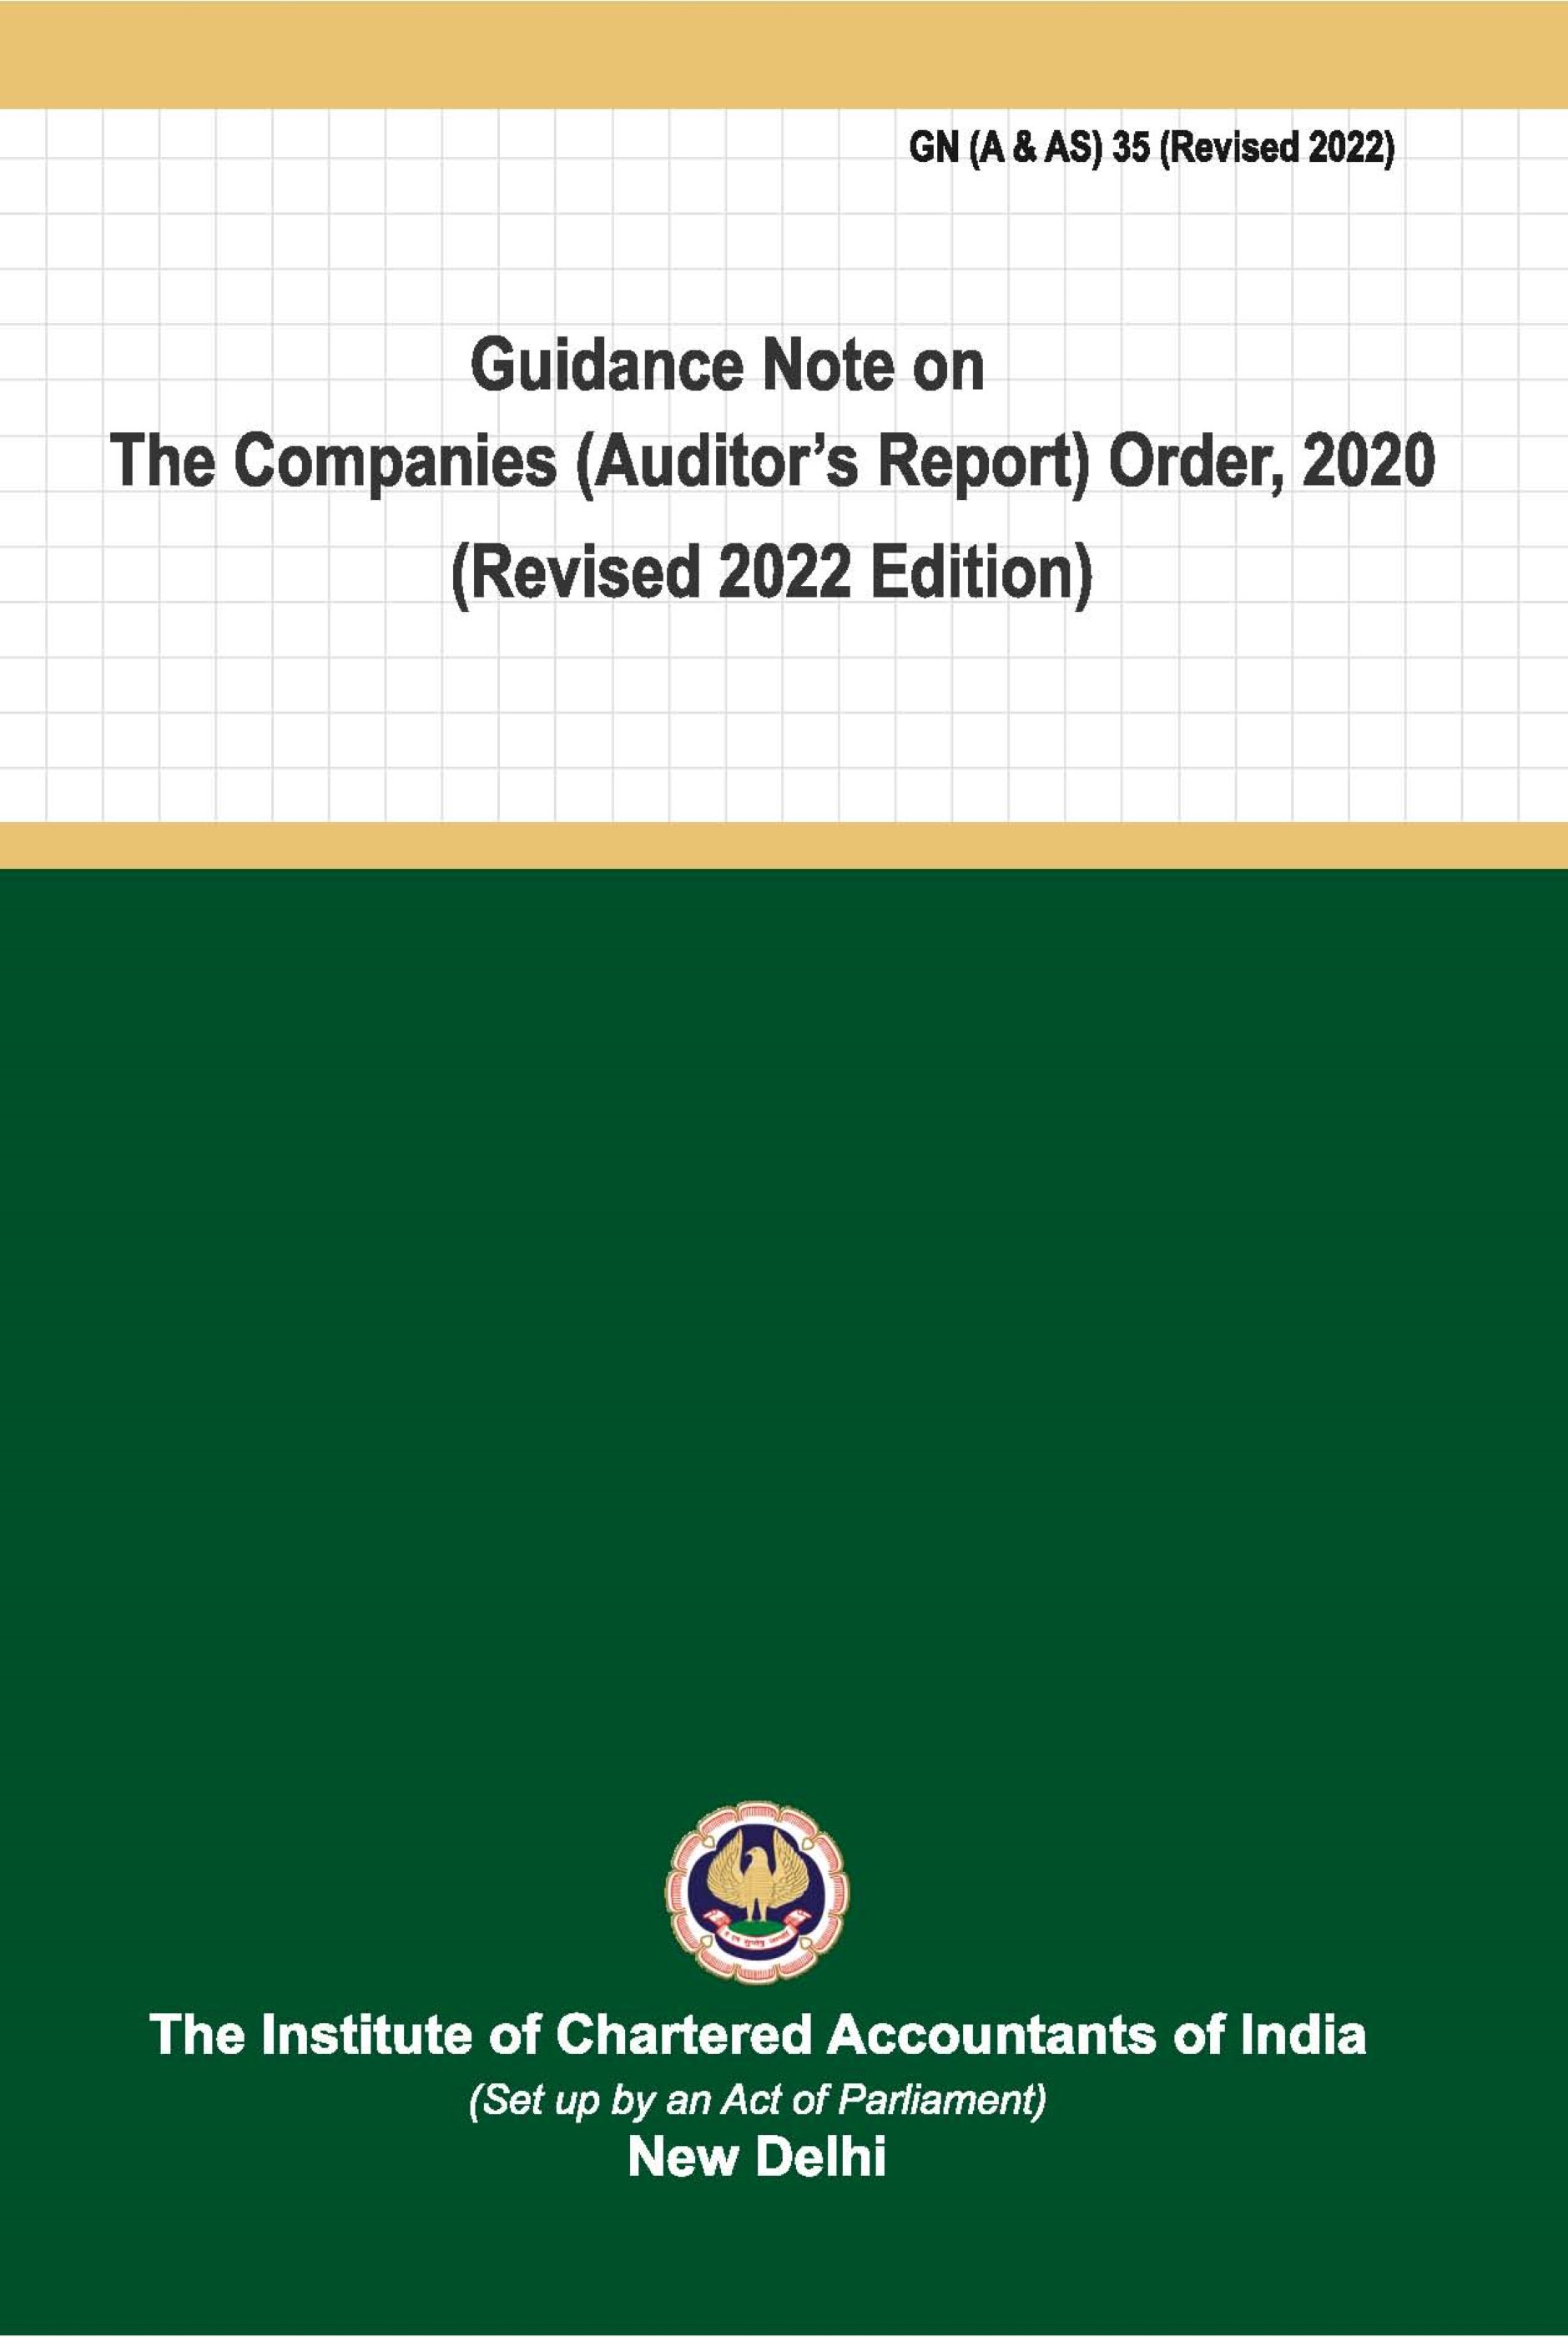 Guidance Note on The Companies (Auditor's Report) Order, 2020 (Revised 2022 Edition) - (July, 2022)